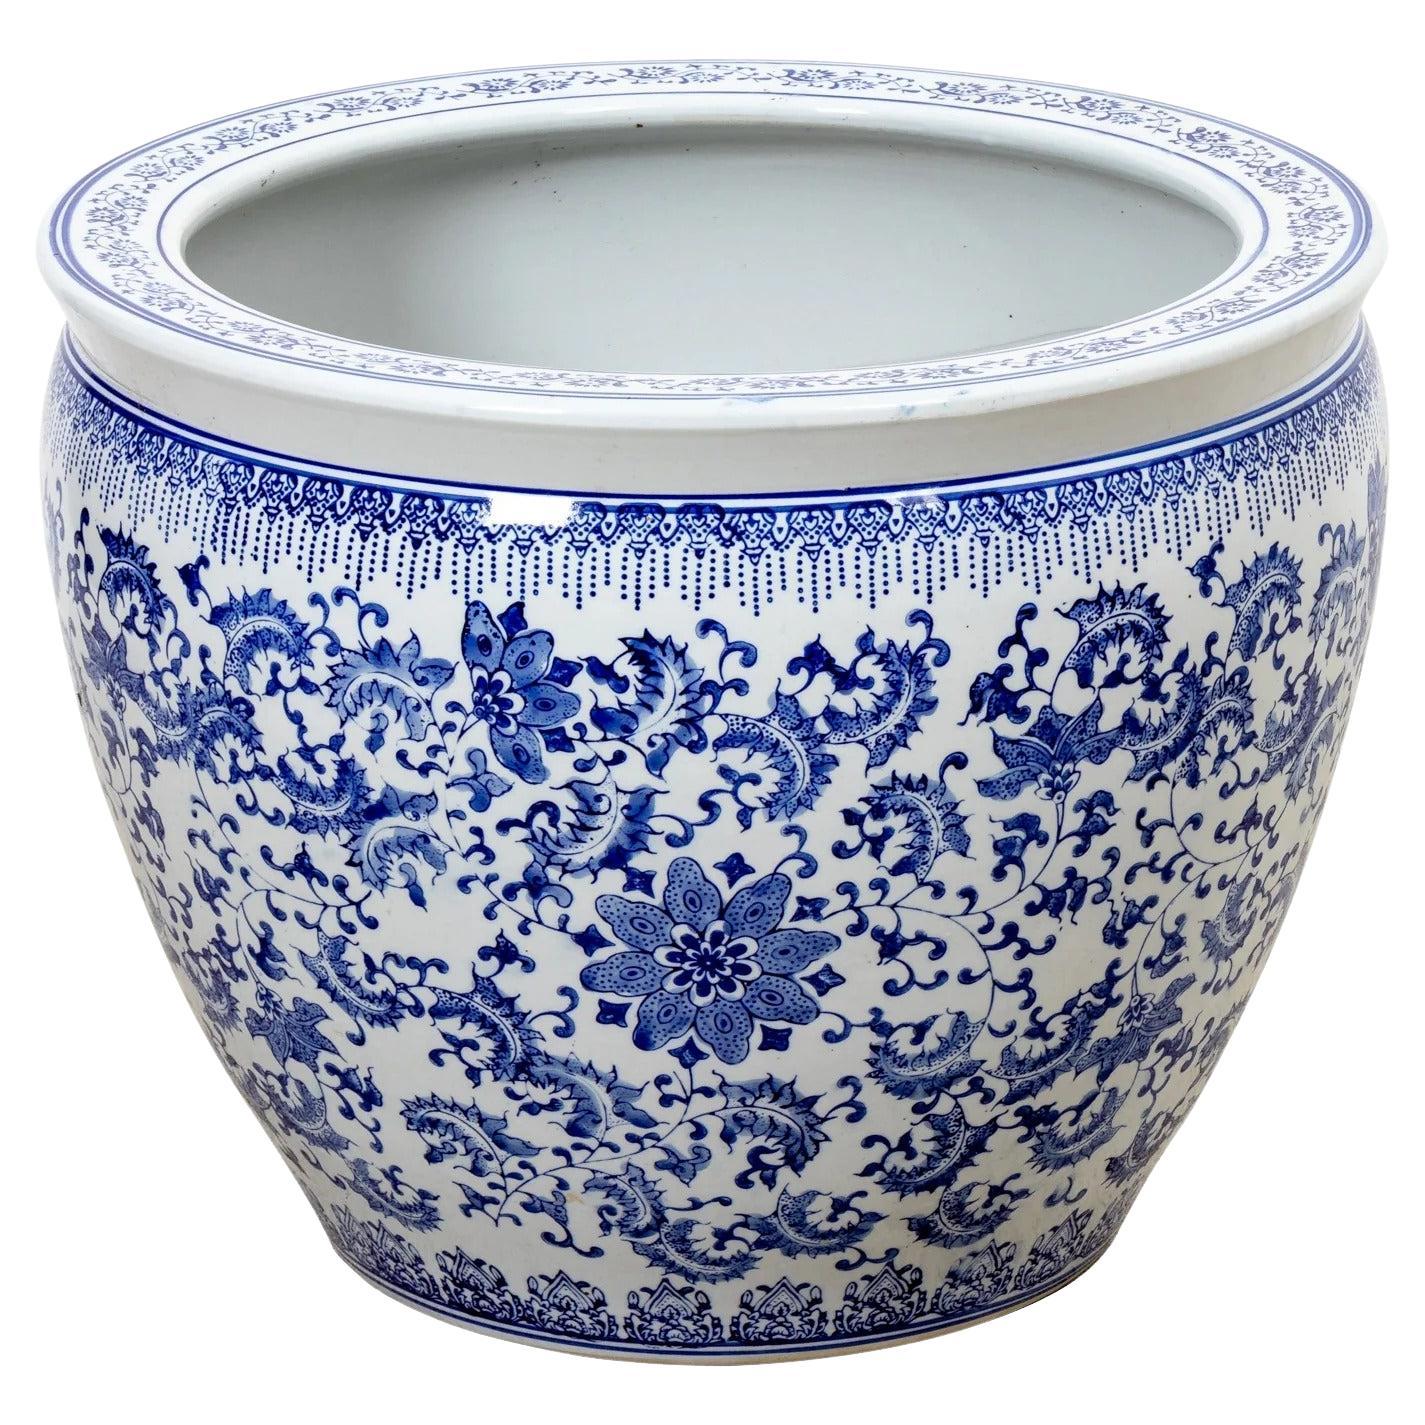 Large Blue and White Porcelain Planter For Sale at 1stDibs